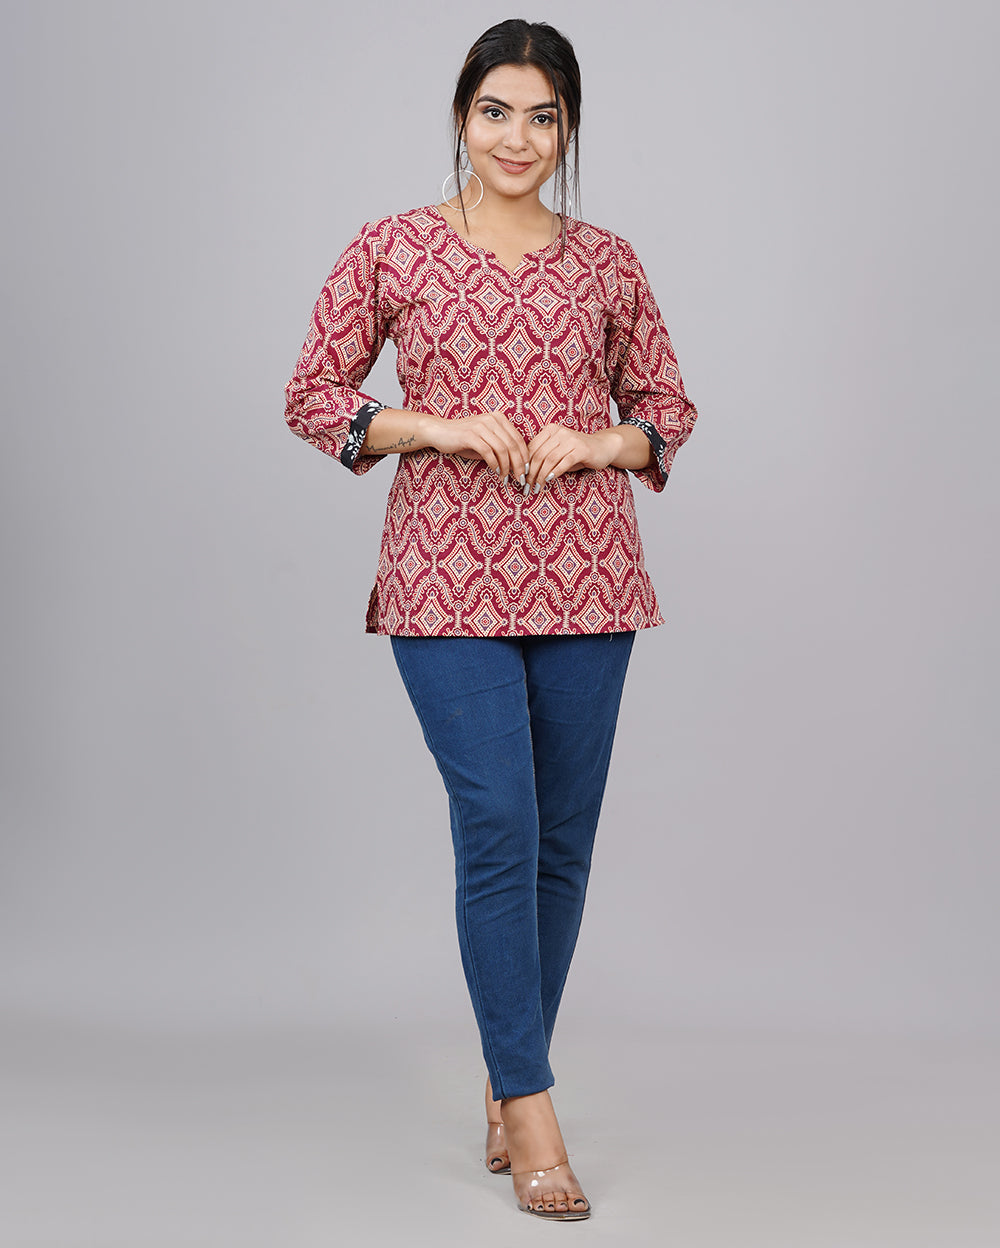 Red Monochrome Hand block Printed Cotton Top